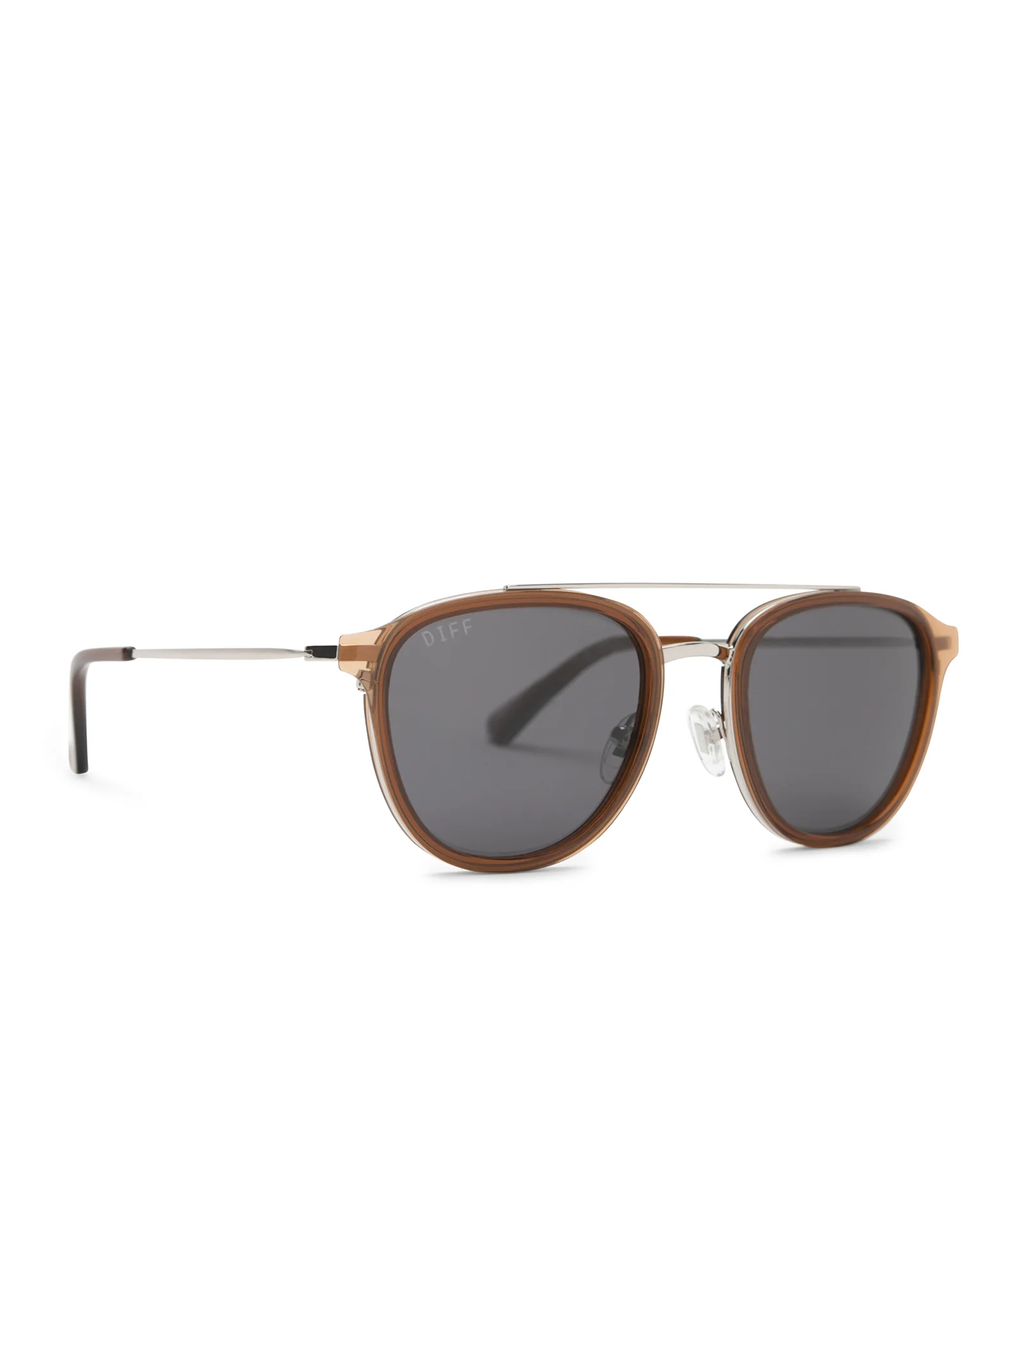 Camden Sunnies in Whiskey Grey Polarized - Stitch And Feather